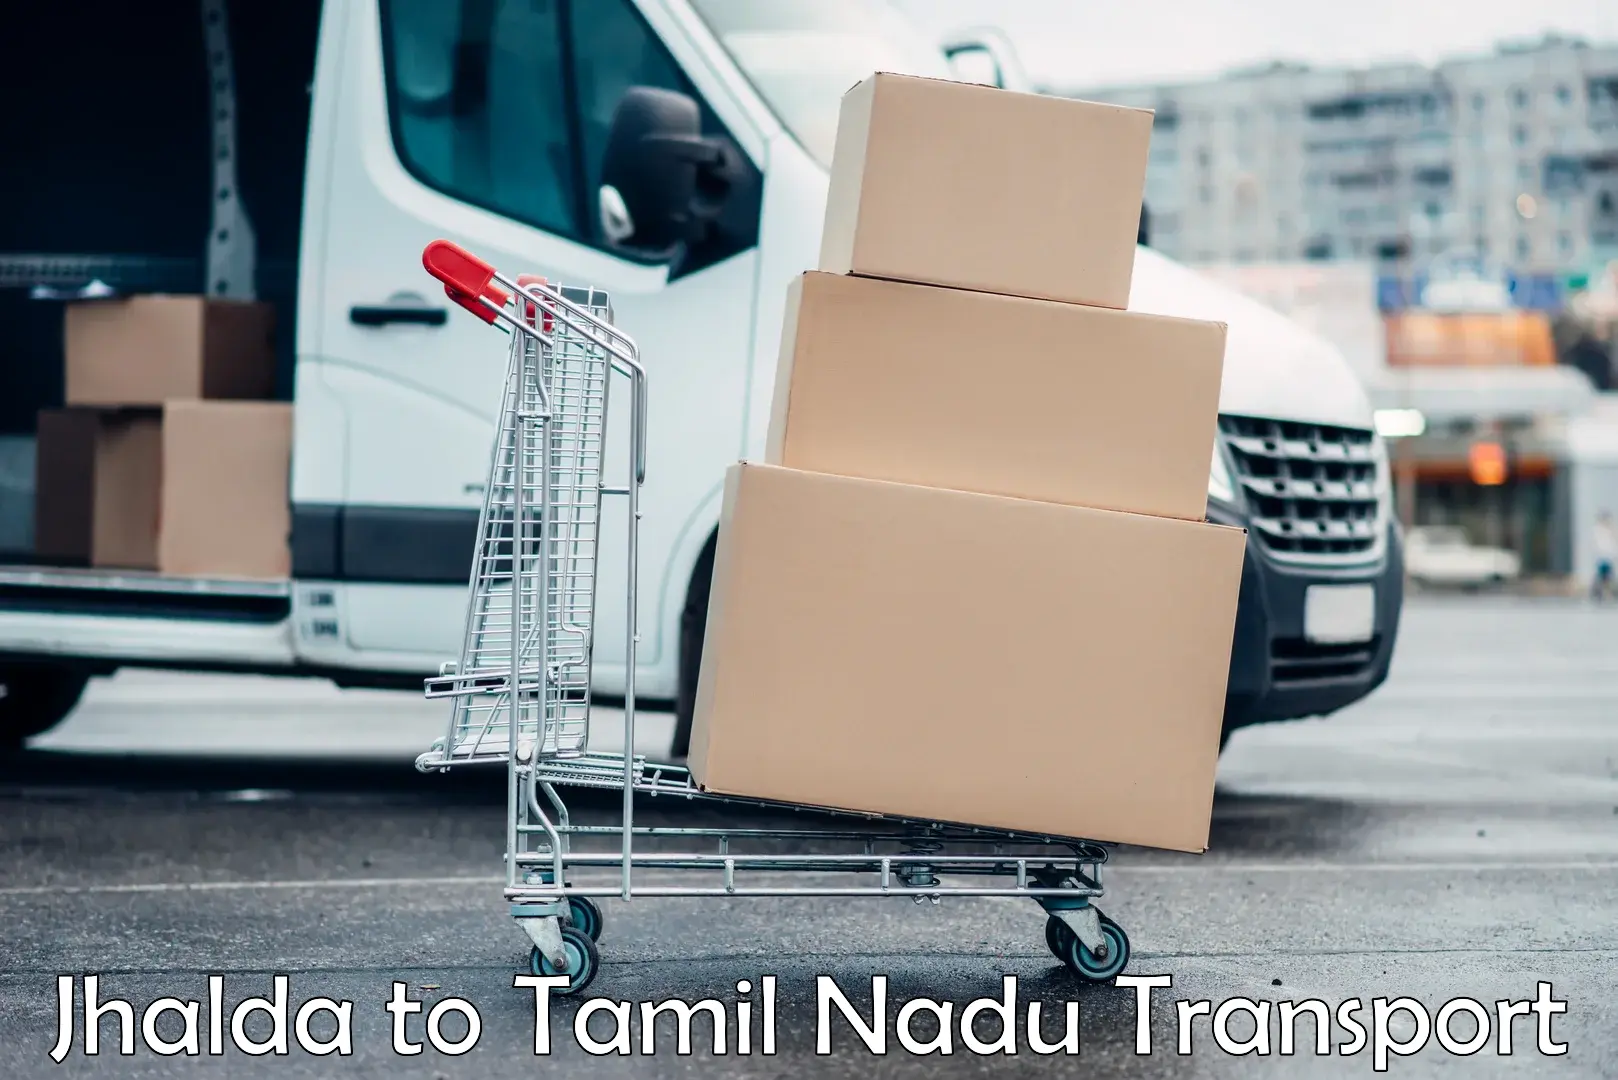 Parcel transport services Jhalda to Shanmugha Arts Science Technology and Research Academy Thanjavur